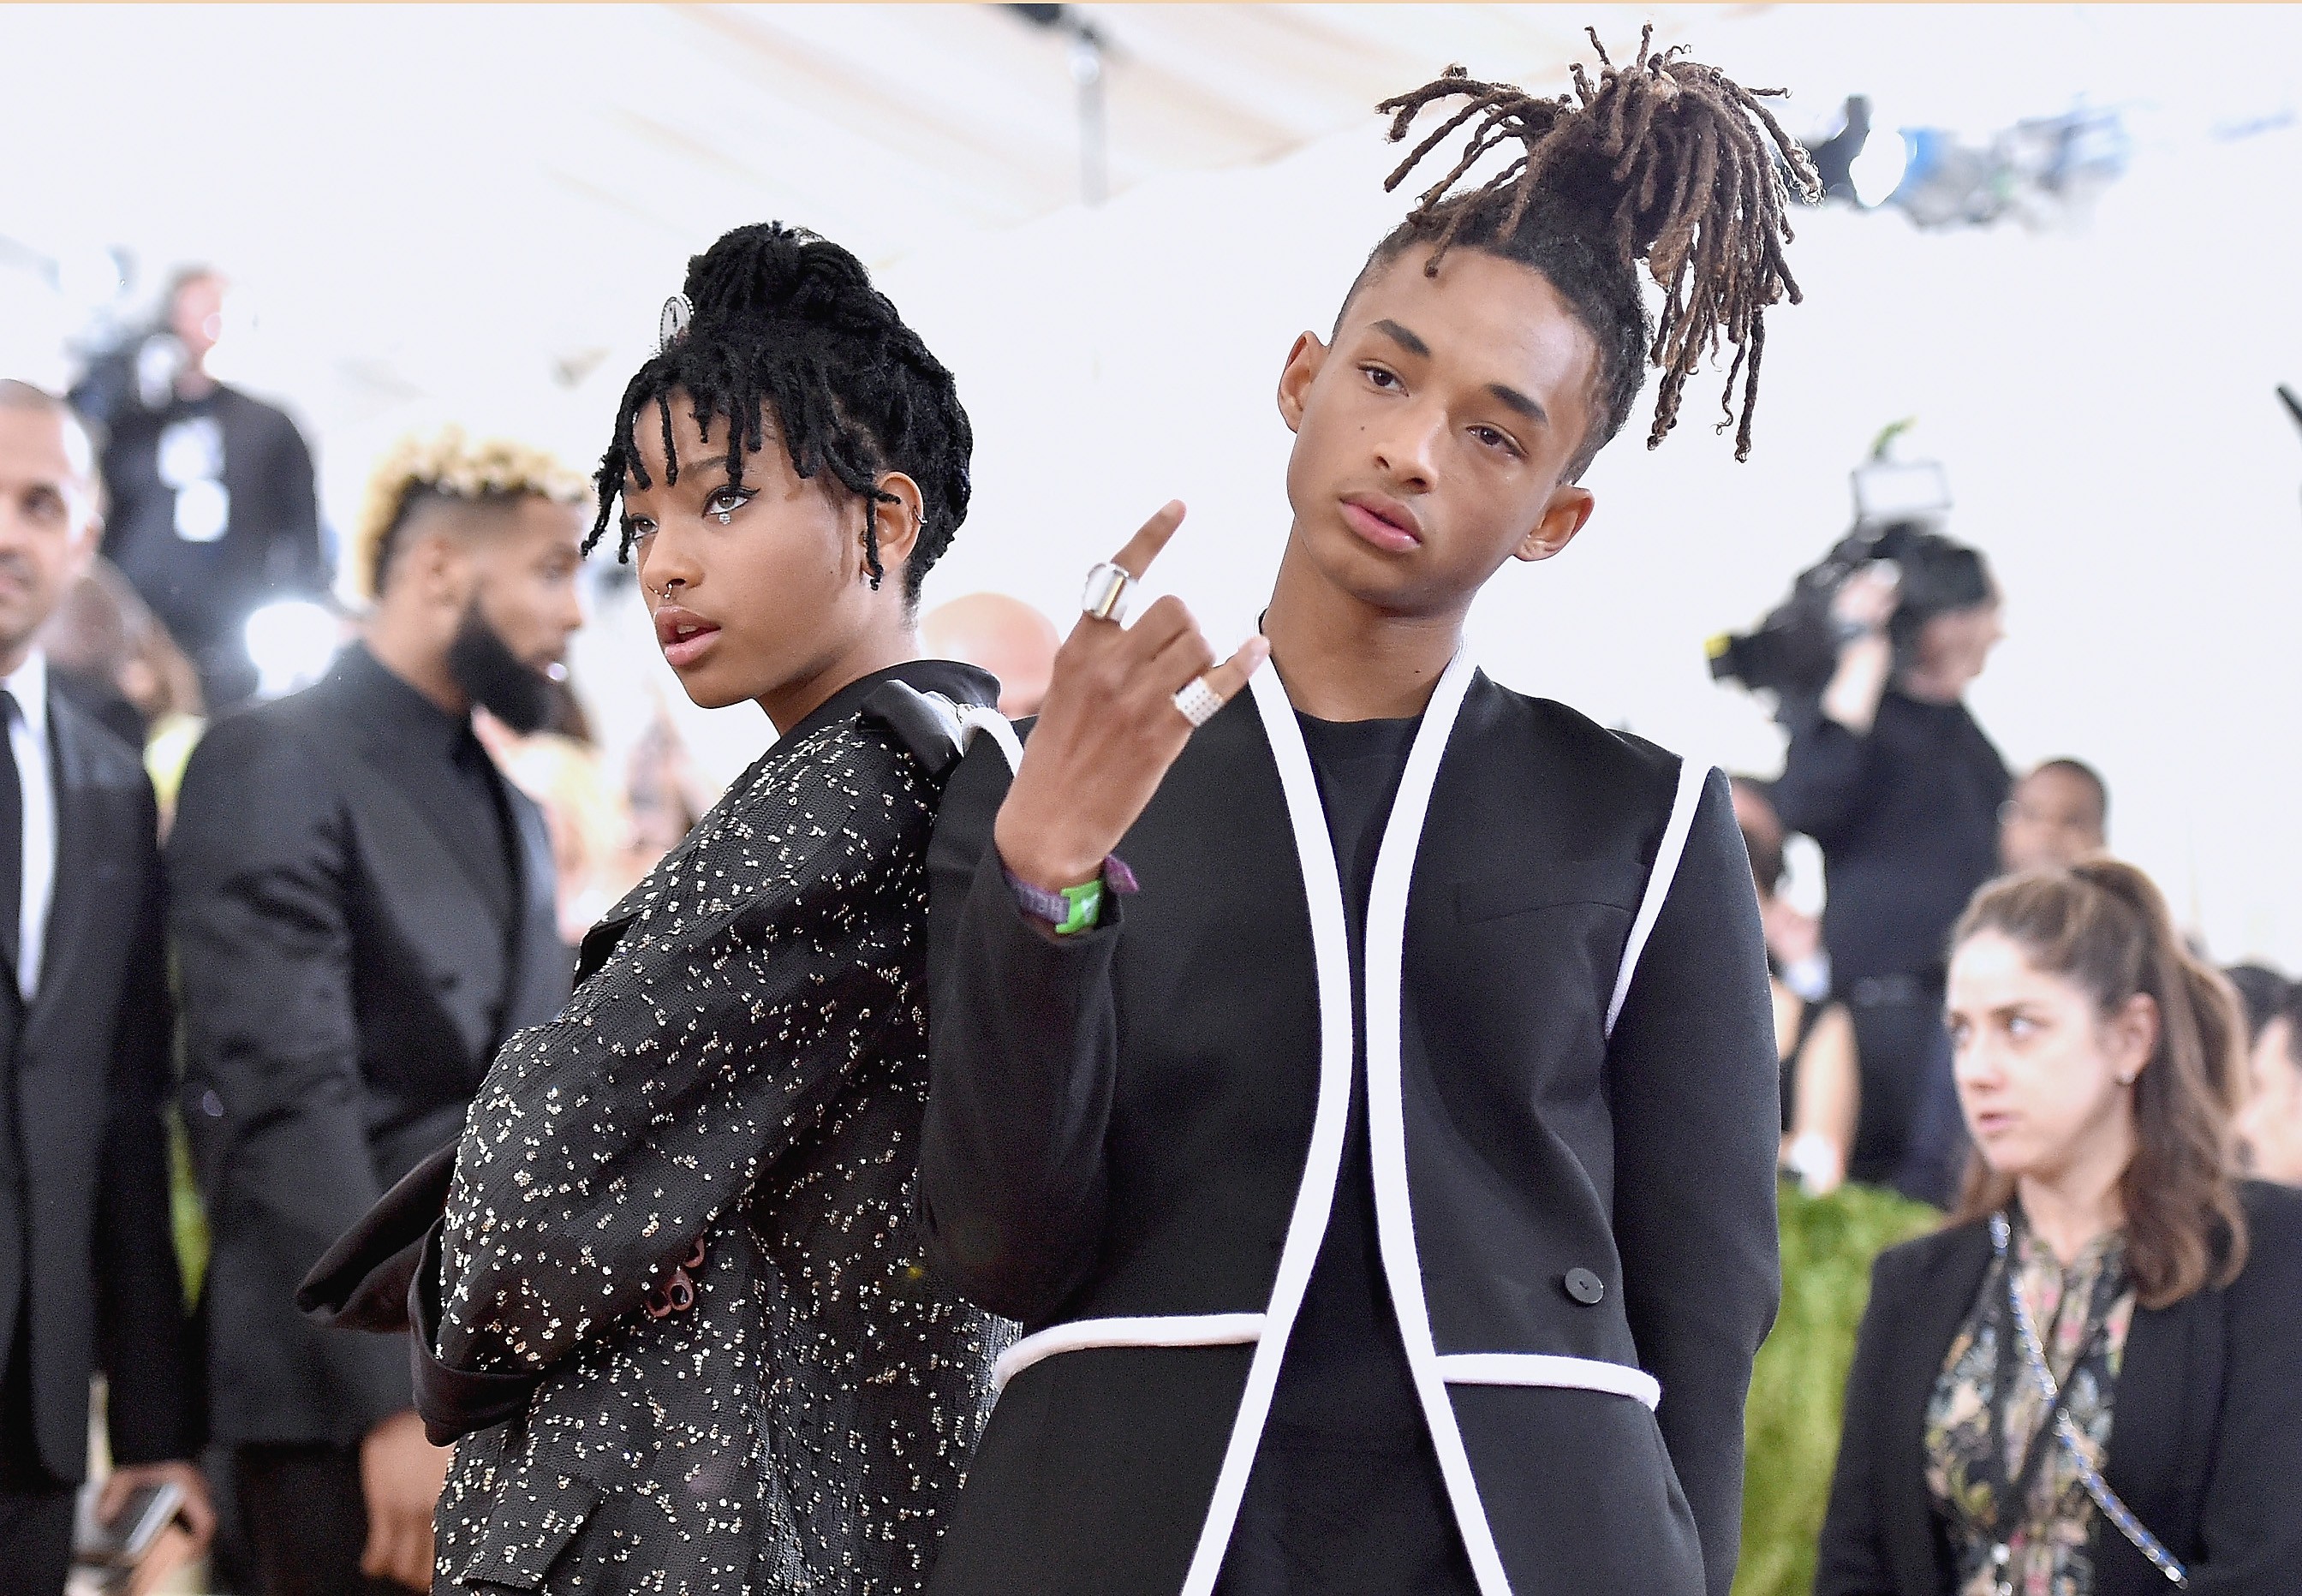 NEW YORK, NY - MAY 02:  Willow Smith and Jaden Smith attend the "Manus x Machina: Fashion In An Age Of Technology" Costume Institute Gala at Metropolitan Museum of Art on May 2, 2016 in New York City.  (Photo by Mike Coppola/Getty Images for People.com) (Foto: Getty Images for People.com)